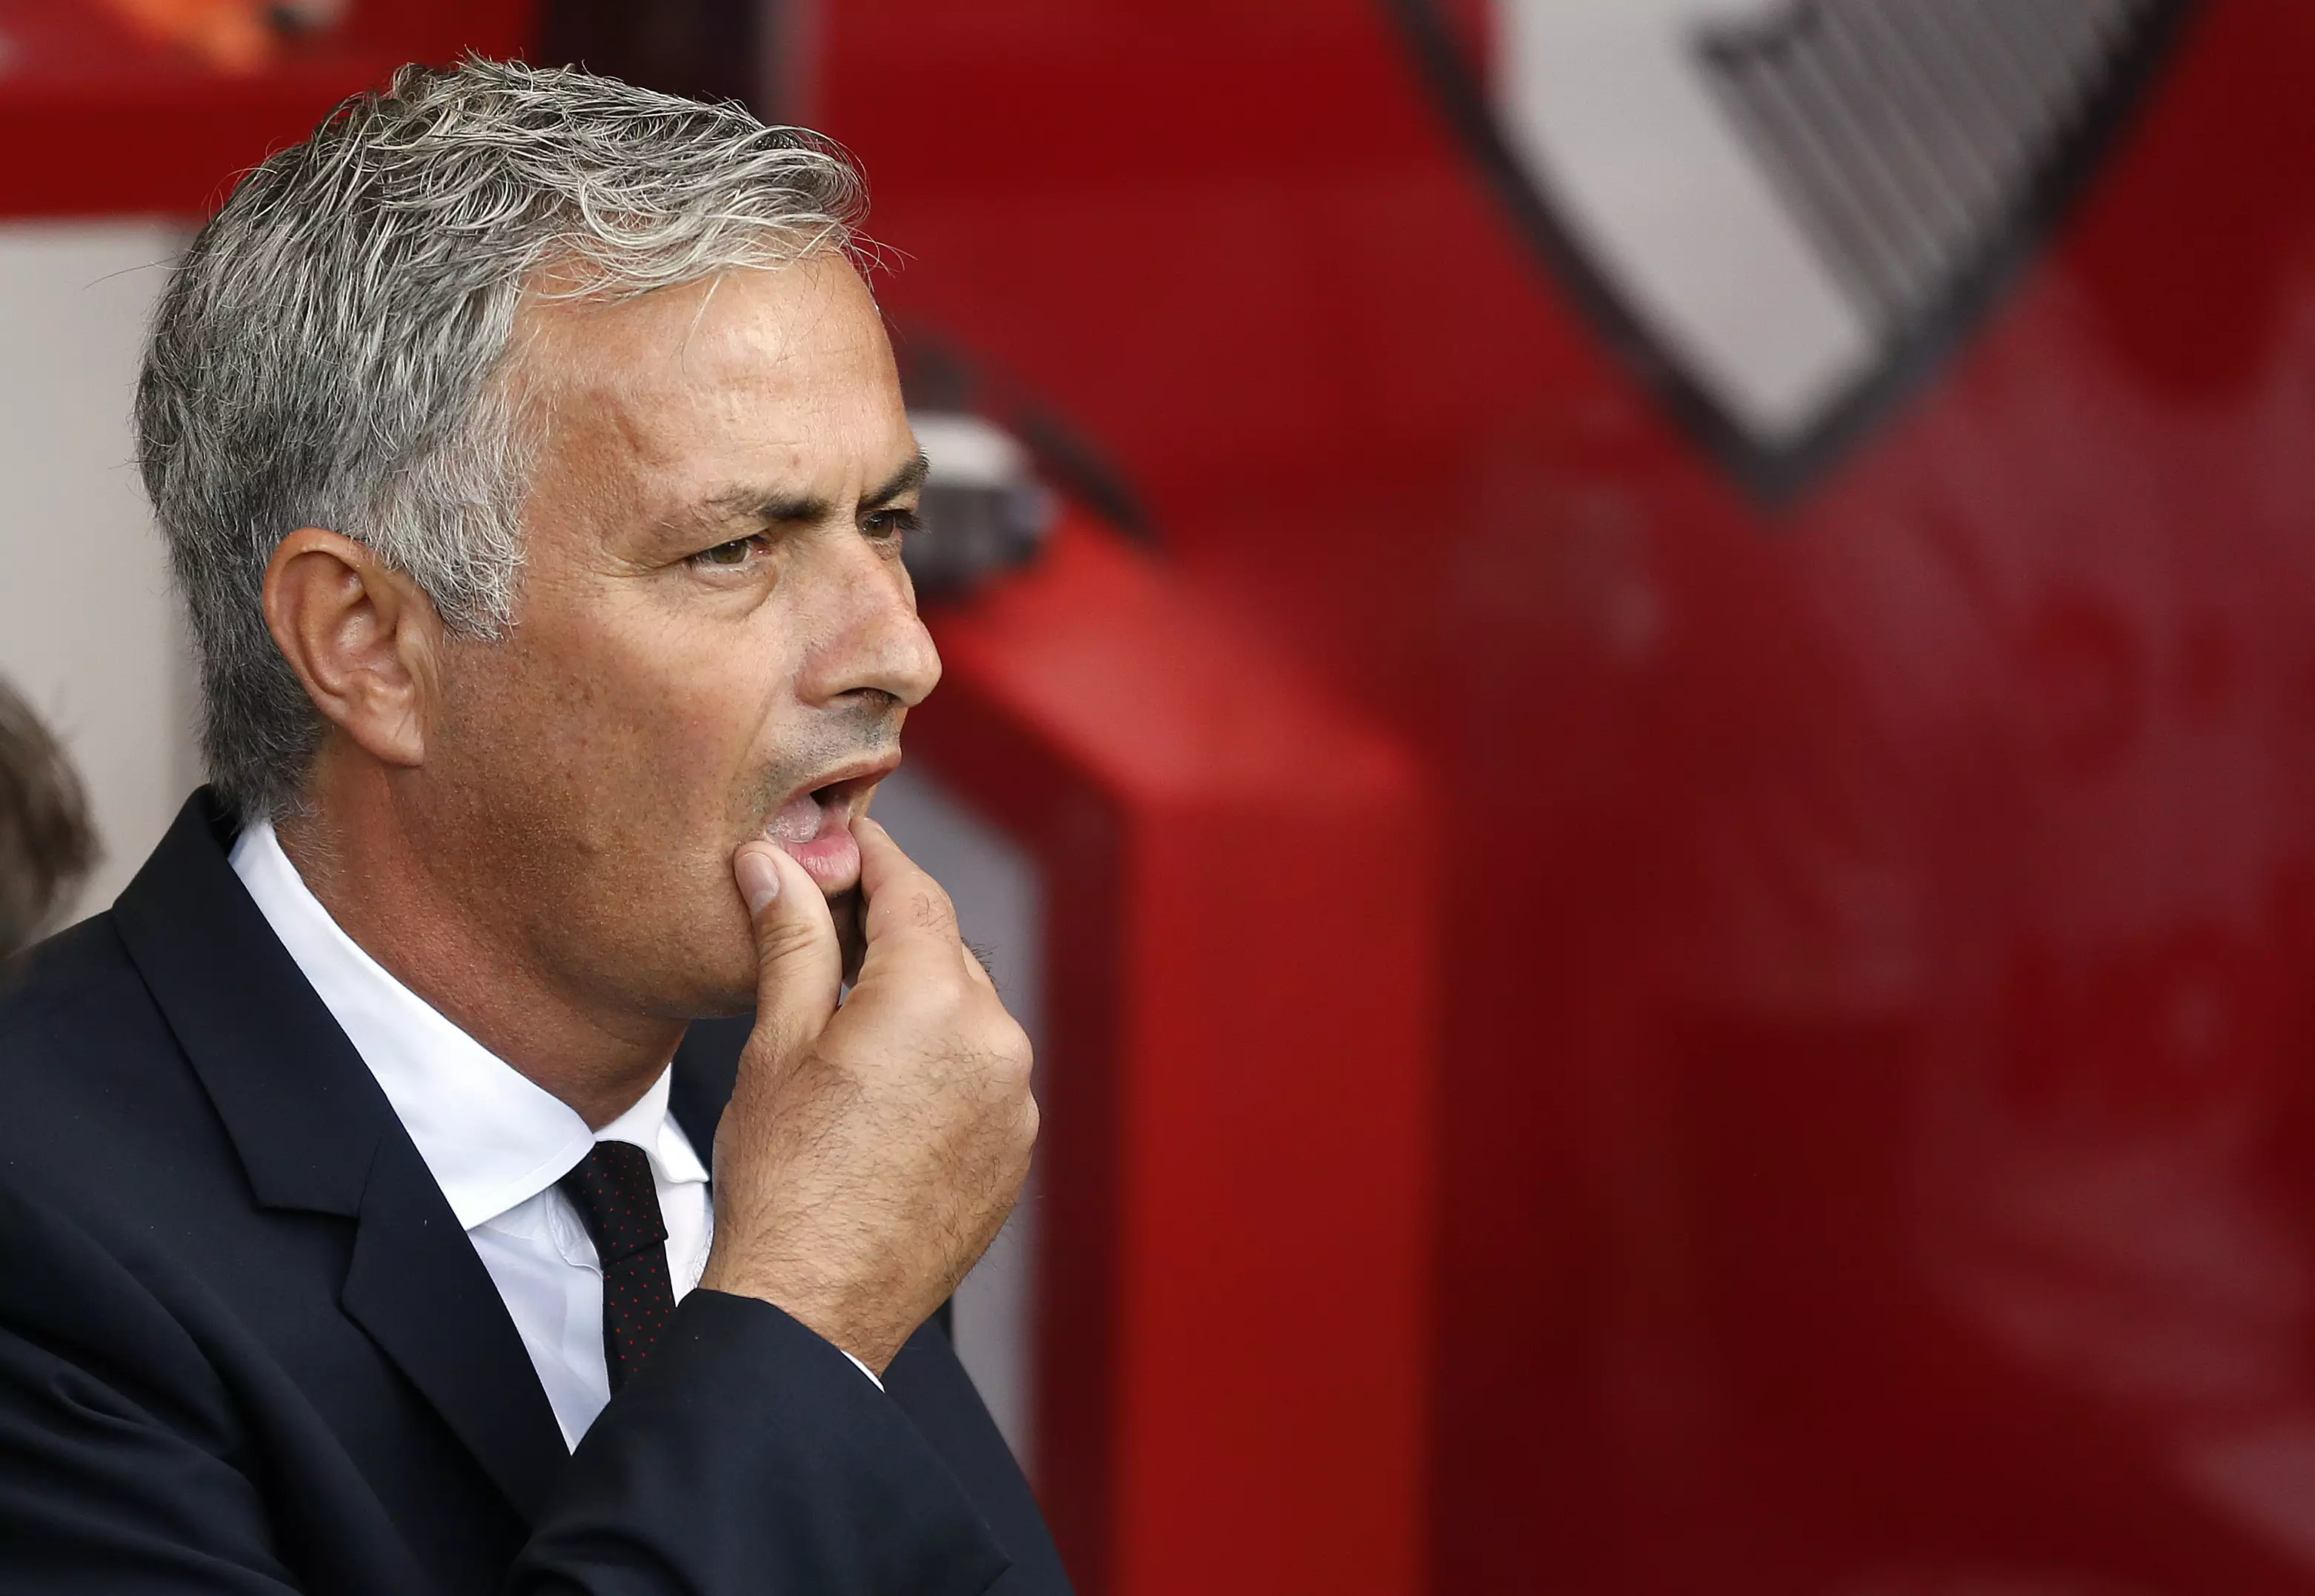 Jose Mourinho Wanted The Liverpool Job In 2004, According To Danny Murphy